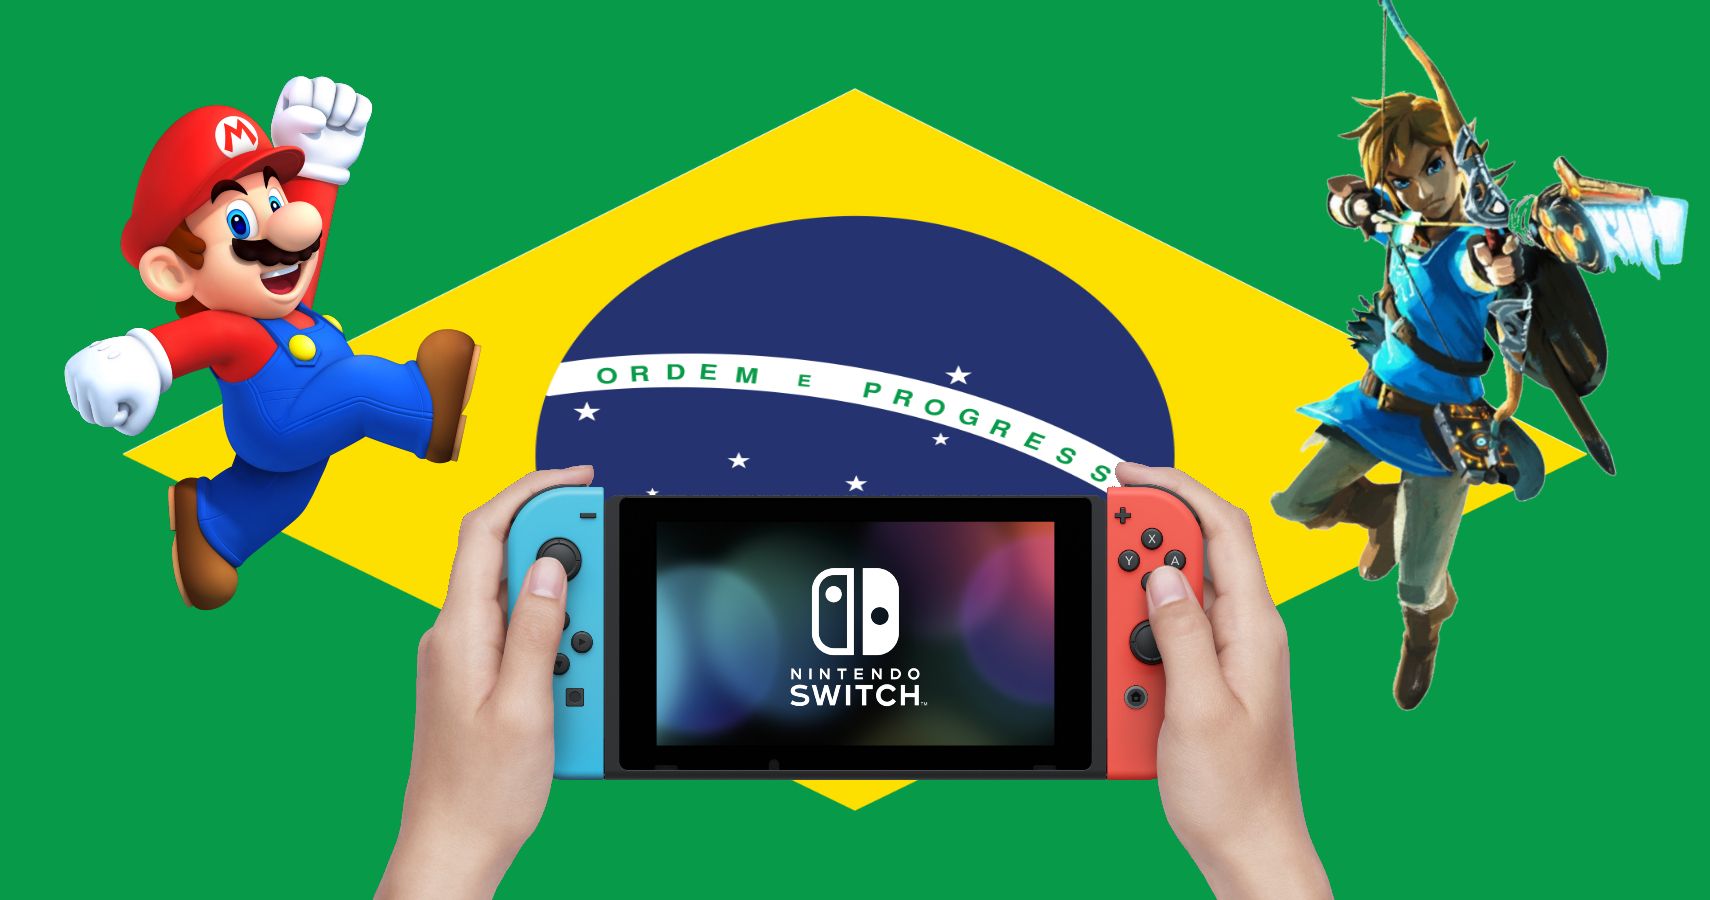 The Nintendo Switch is officially launching in Brazil